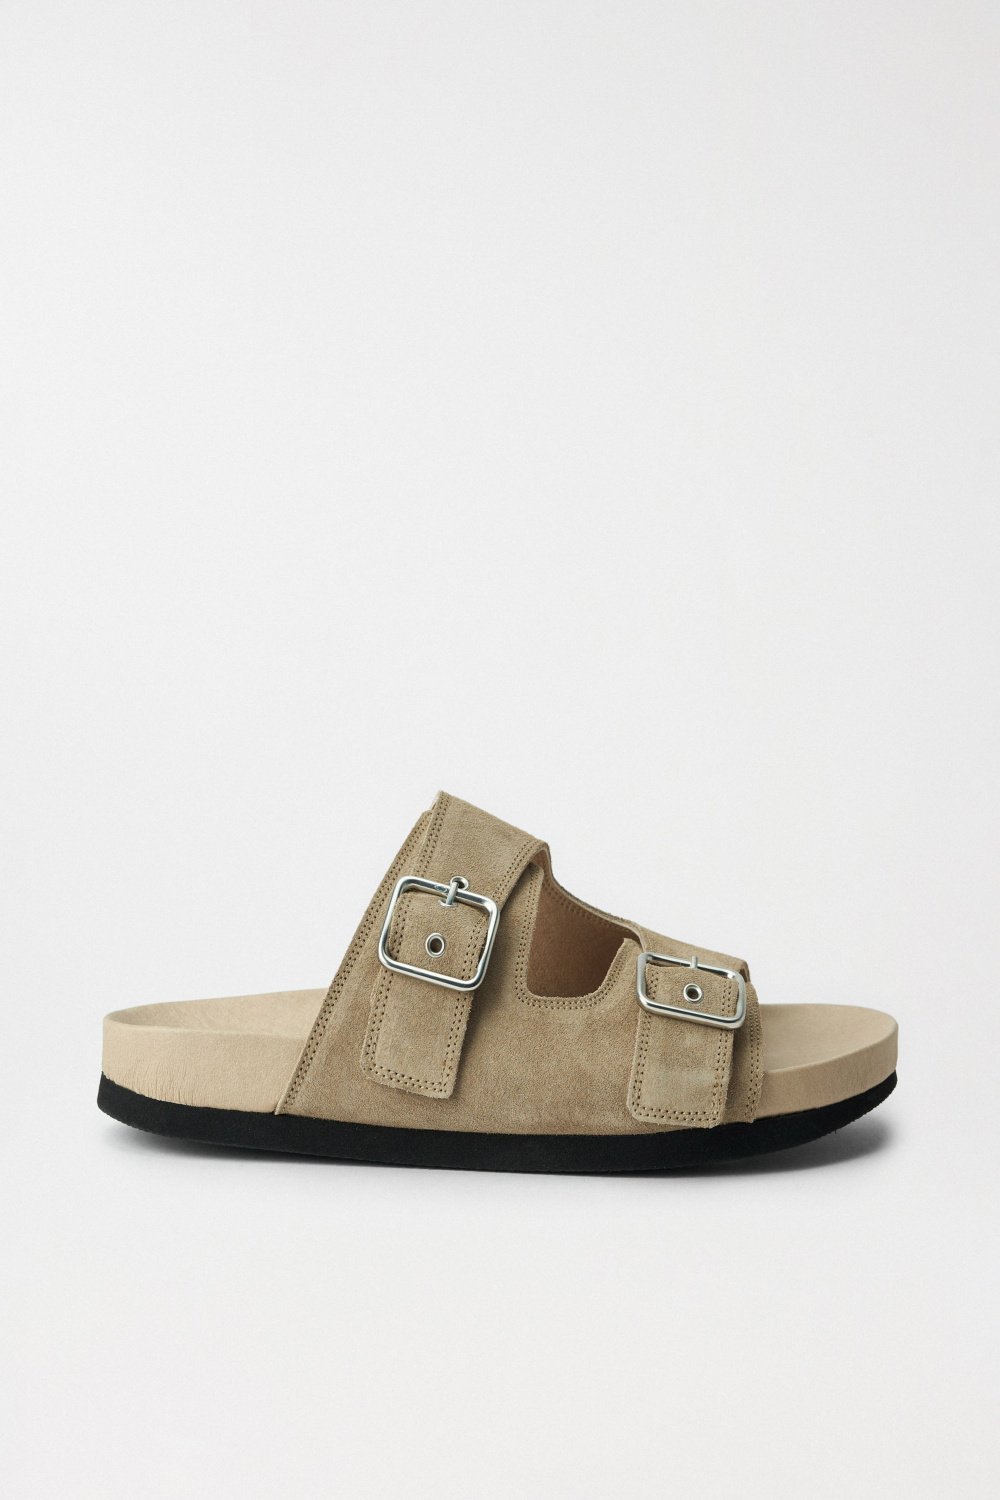 LEATHER SANDALS WITH BUCKLES - Salsa